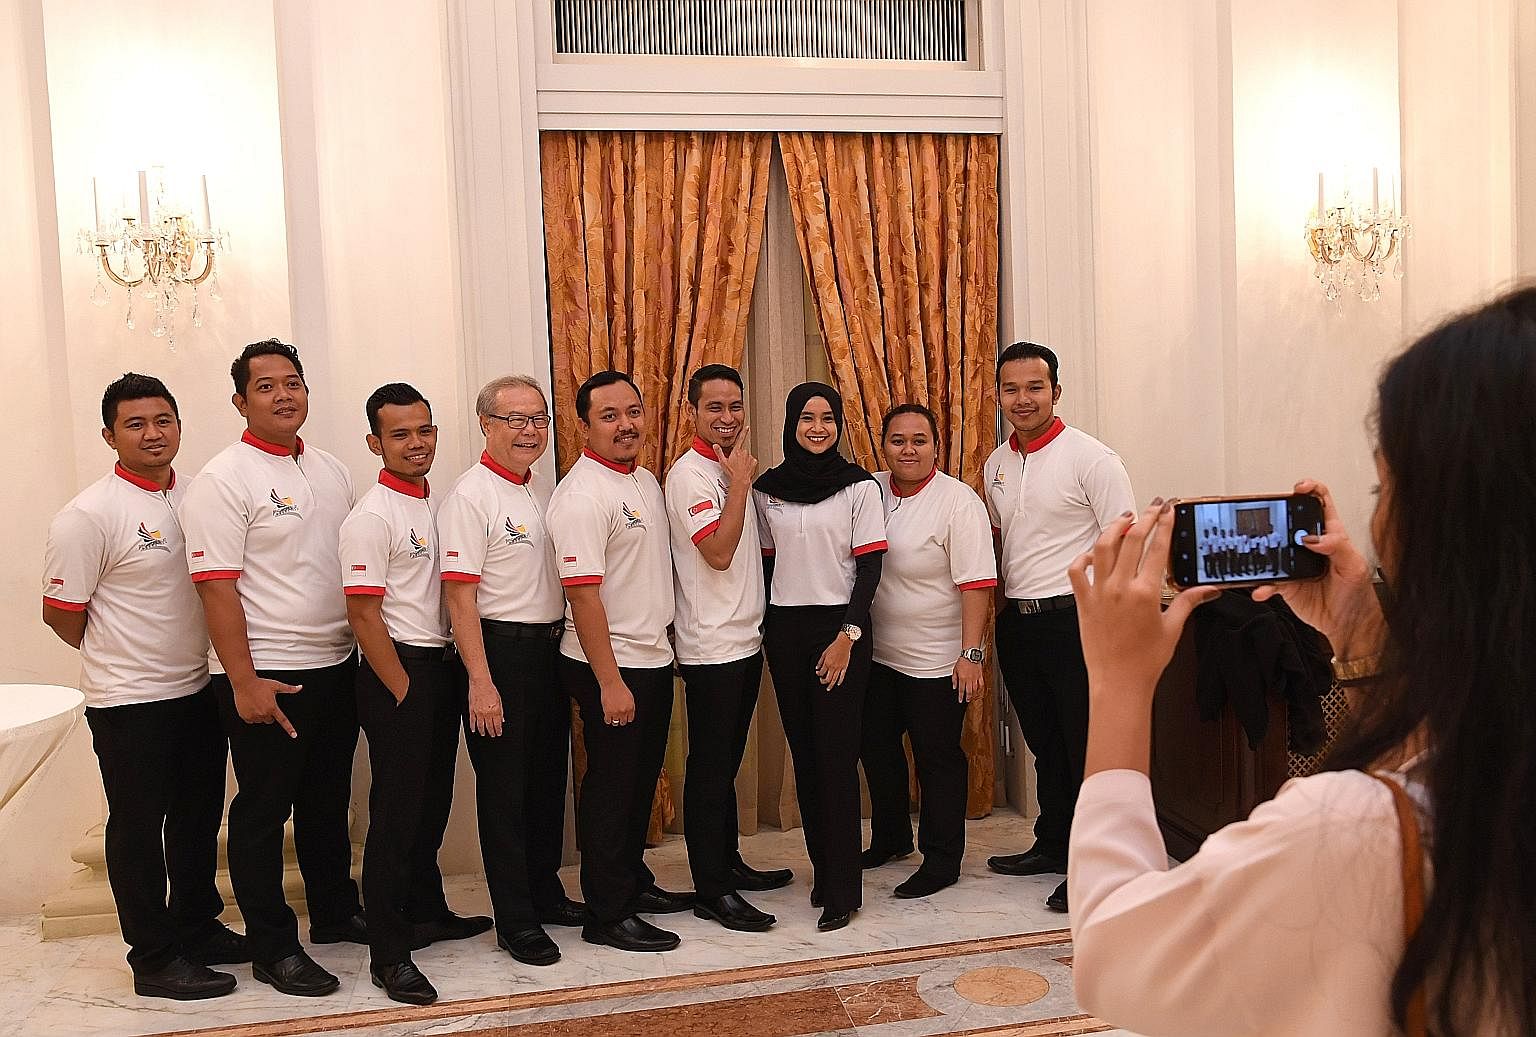 Members of the Singapore silat team posing for a photo at a dinner reception at the Istana yesterday. They were among 209 athletes and officials who were hosted by President Halimah Yacob in recognition of their efforts and achievements at five major